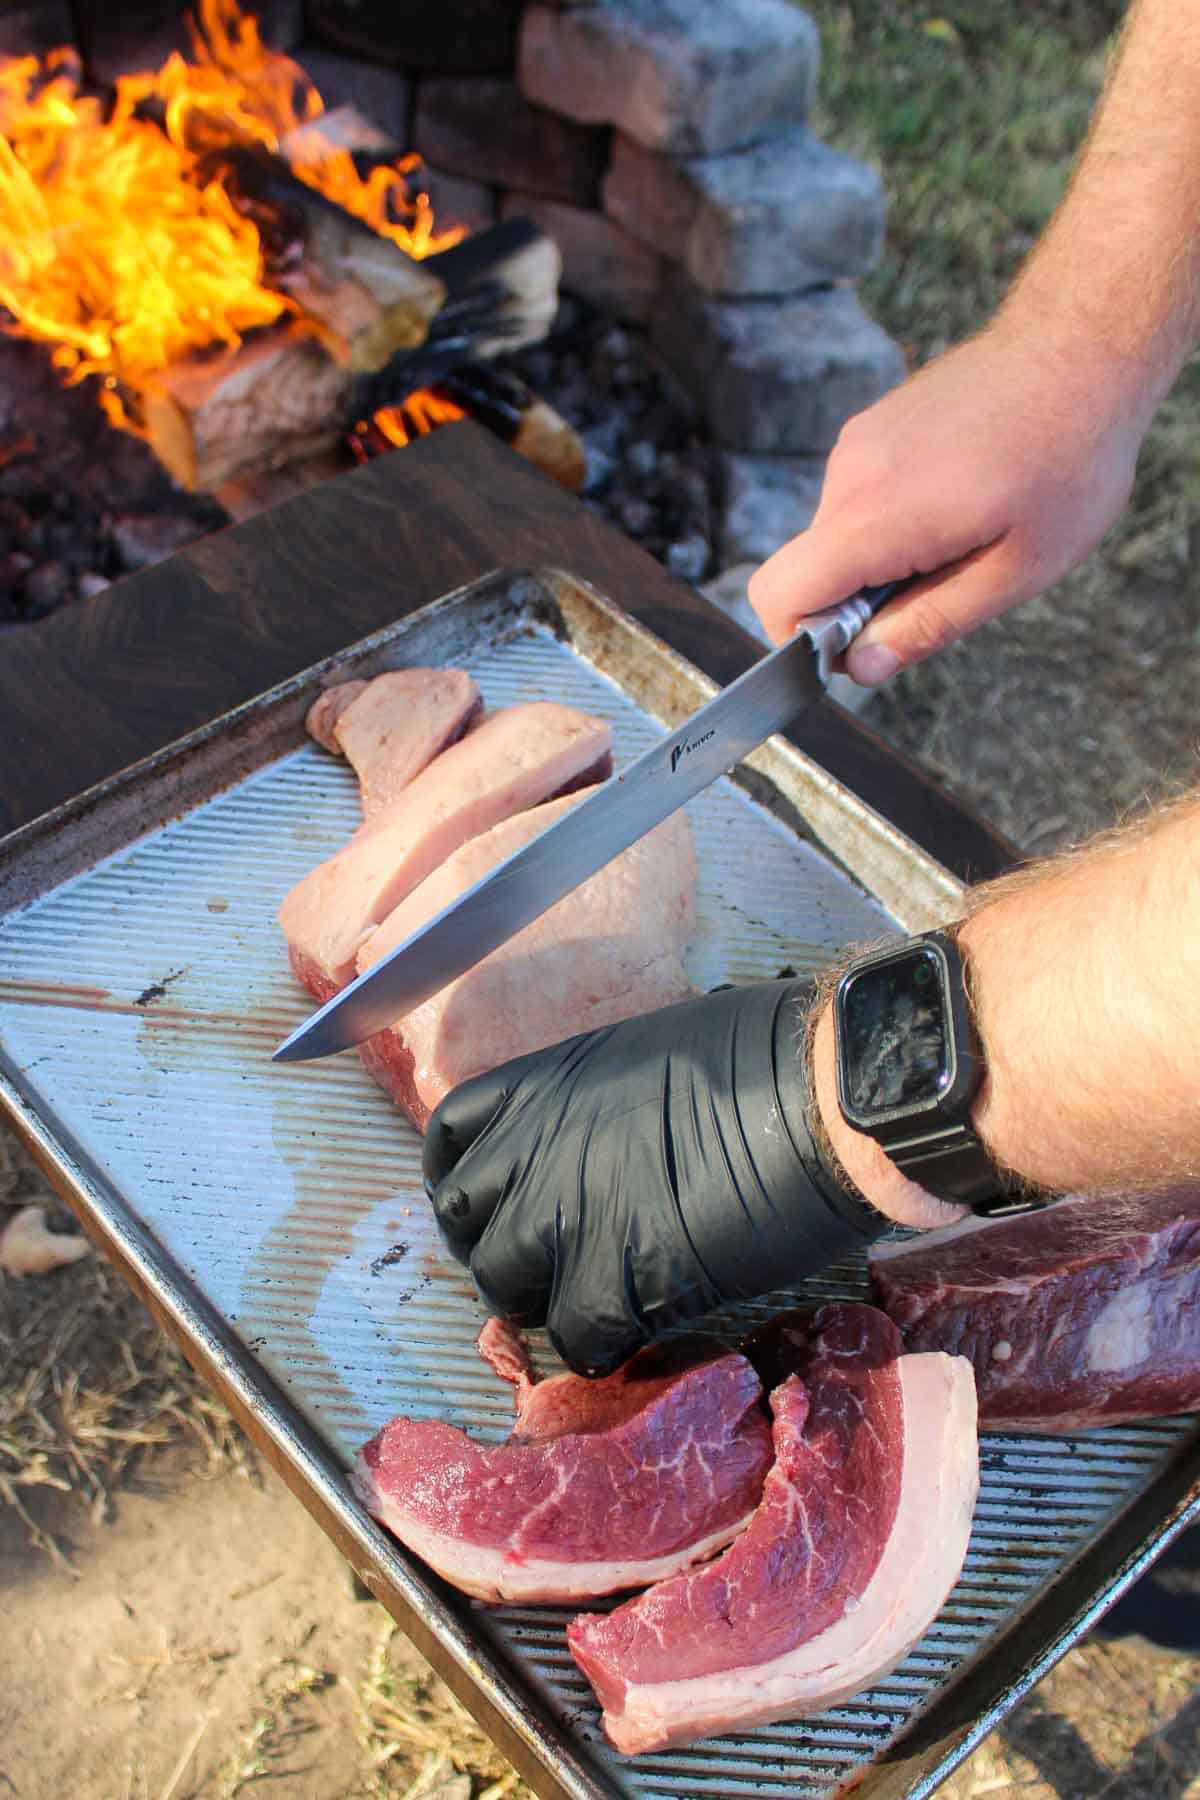 Slicing the picanha on a cutting board.